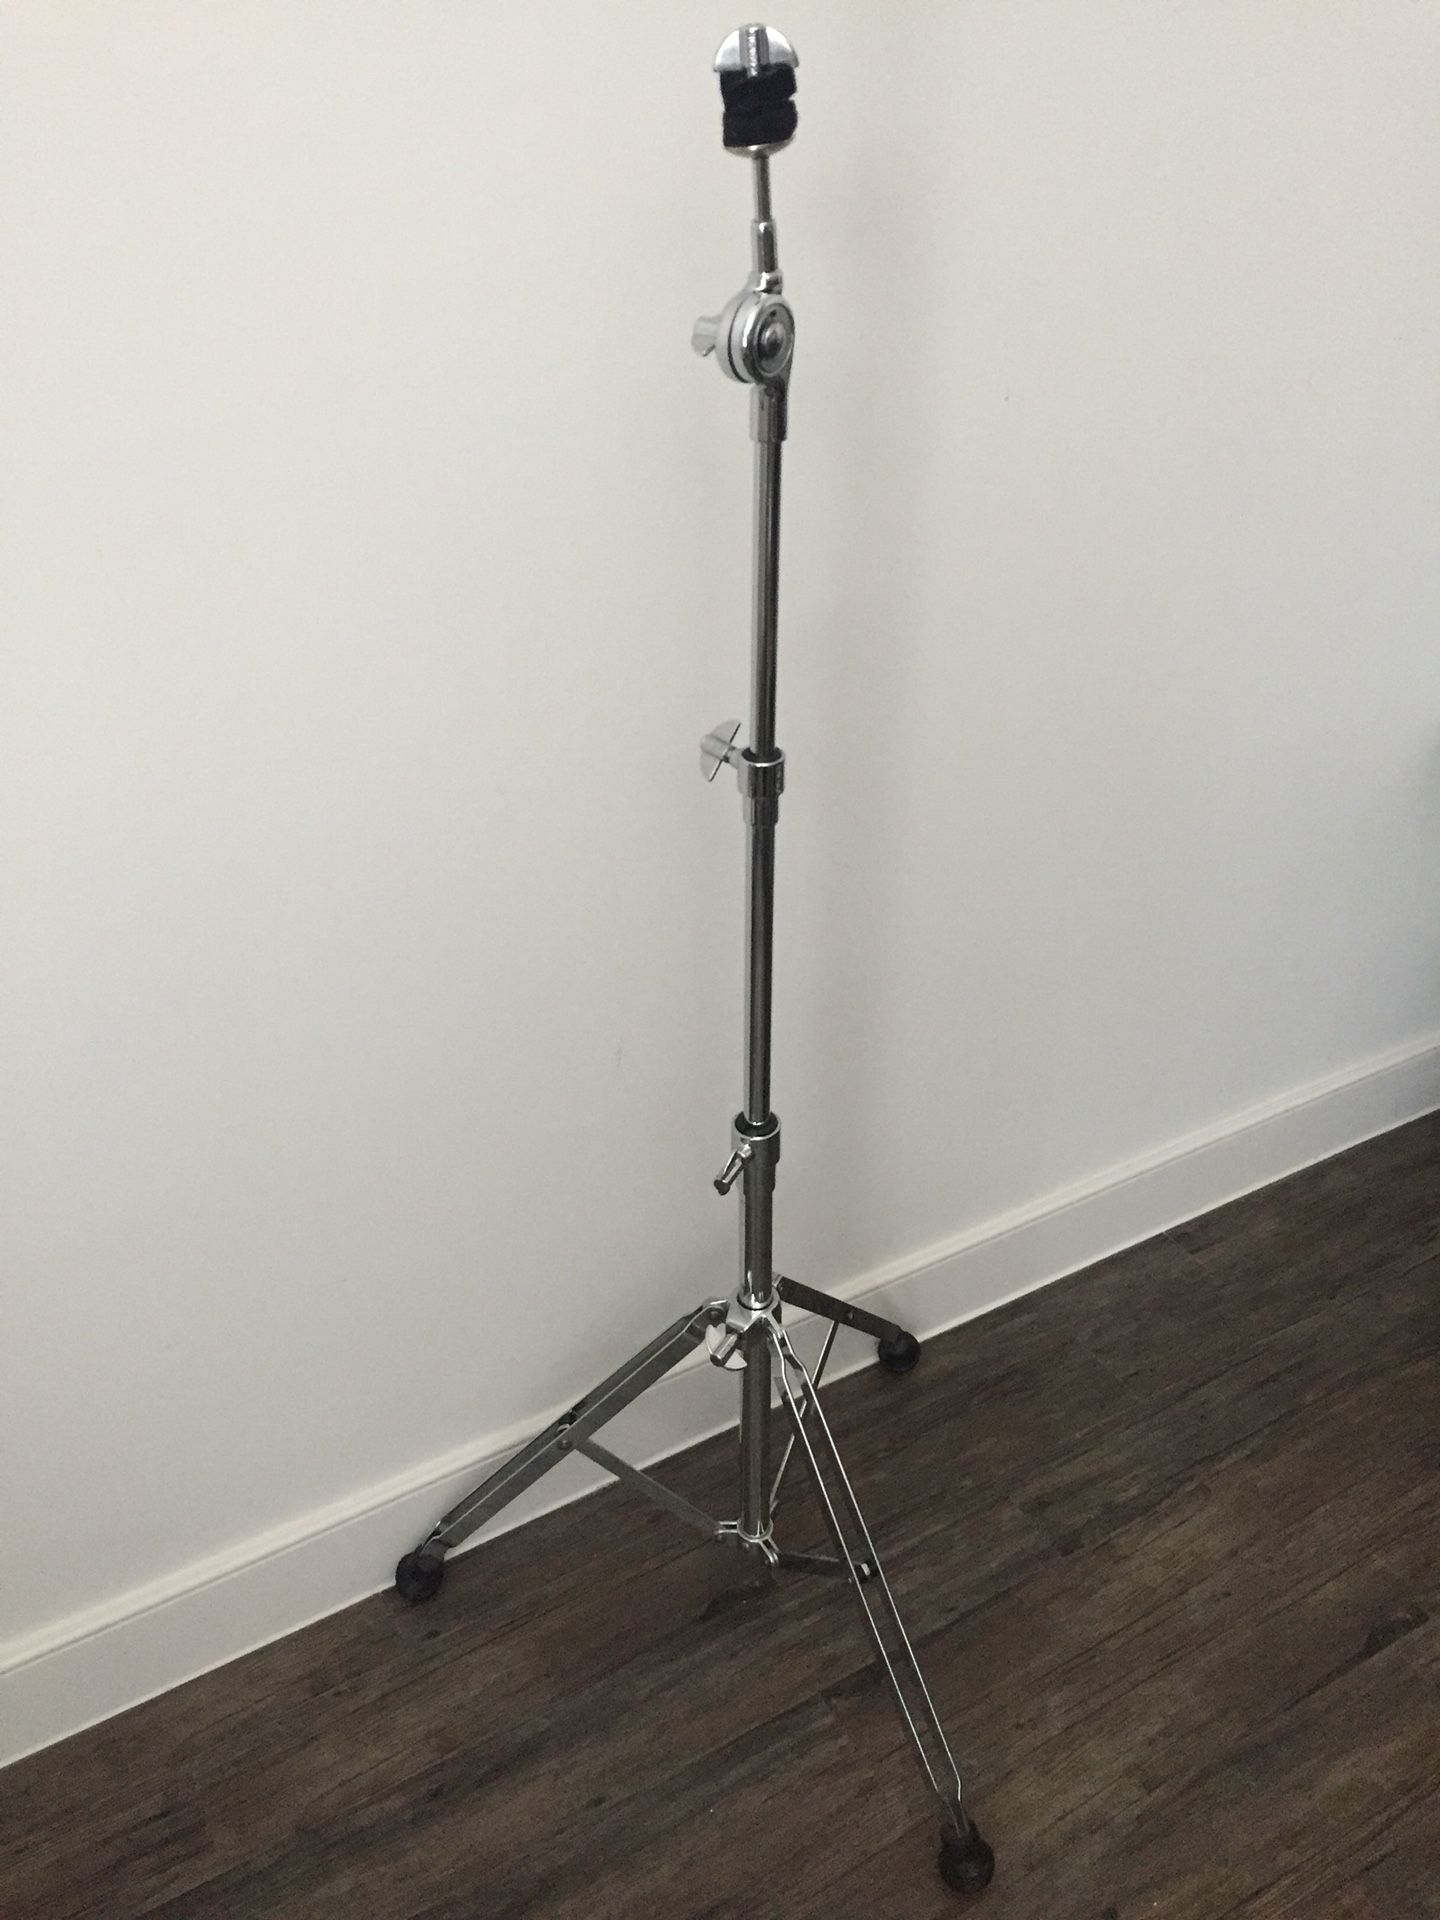 Sonor 200 Series Cymbal Stand